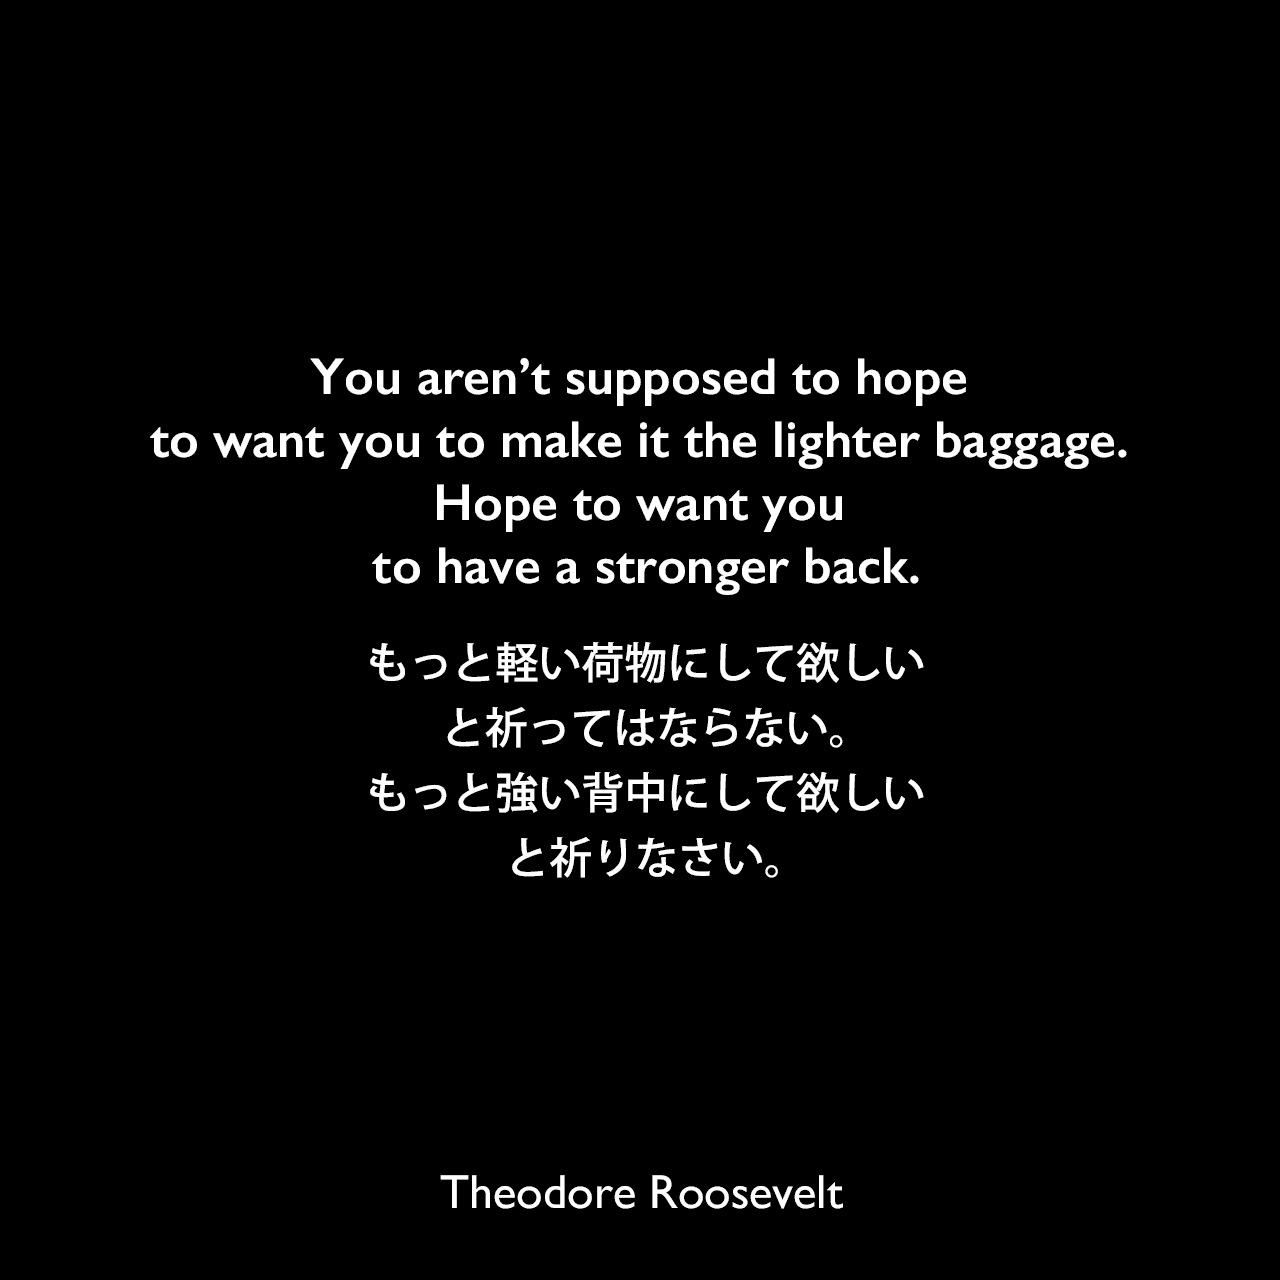 You aren’t supposed to hope to want you to make it the lighter baggage. Hope to want you to have a stronger back.もっと軽い荷物にして欲しい、と祈ってはならない。もっと強い背中にして欲しい、と祈りなさい。Theodore Roosevelt